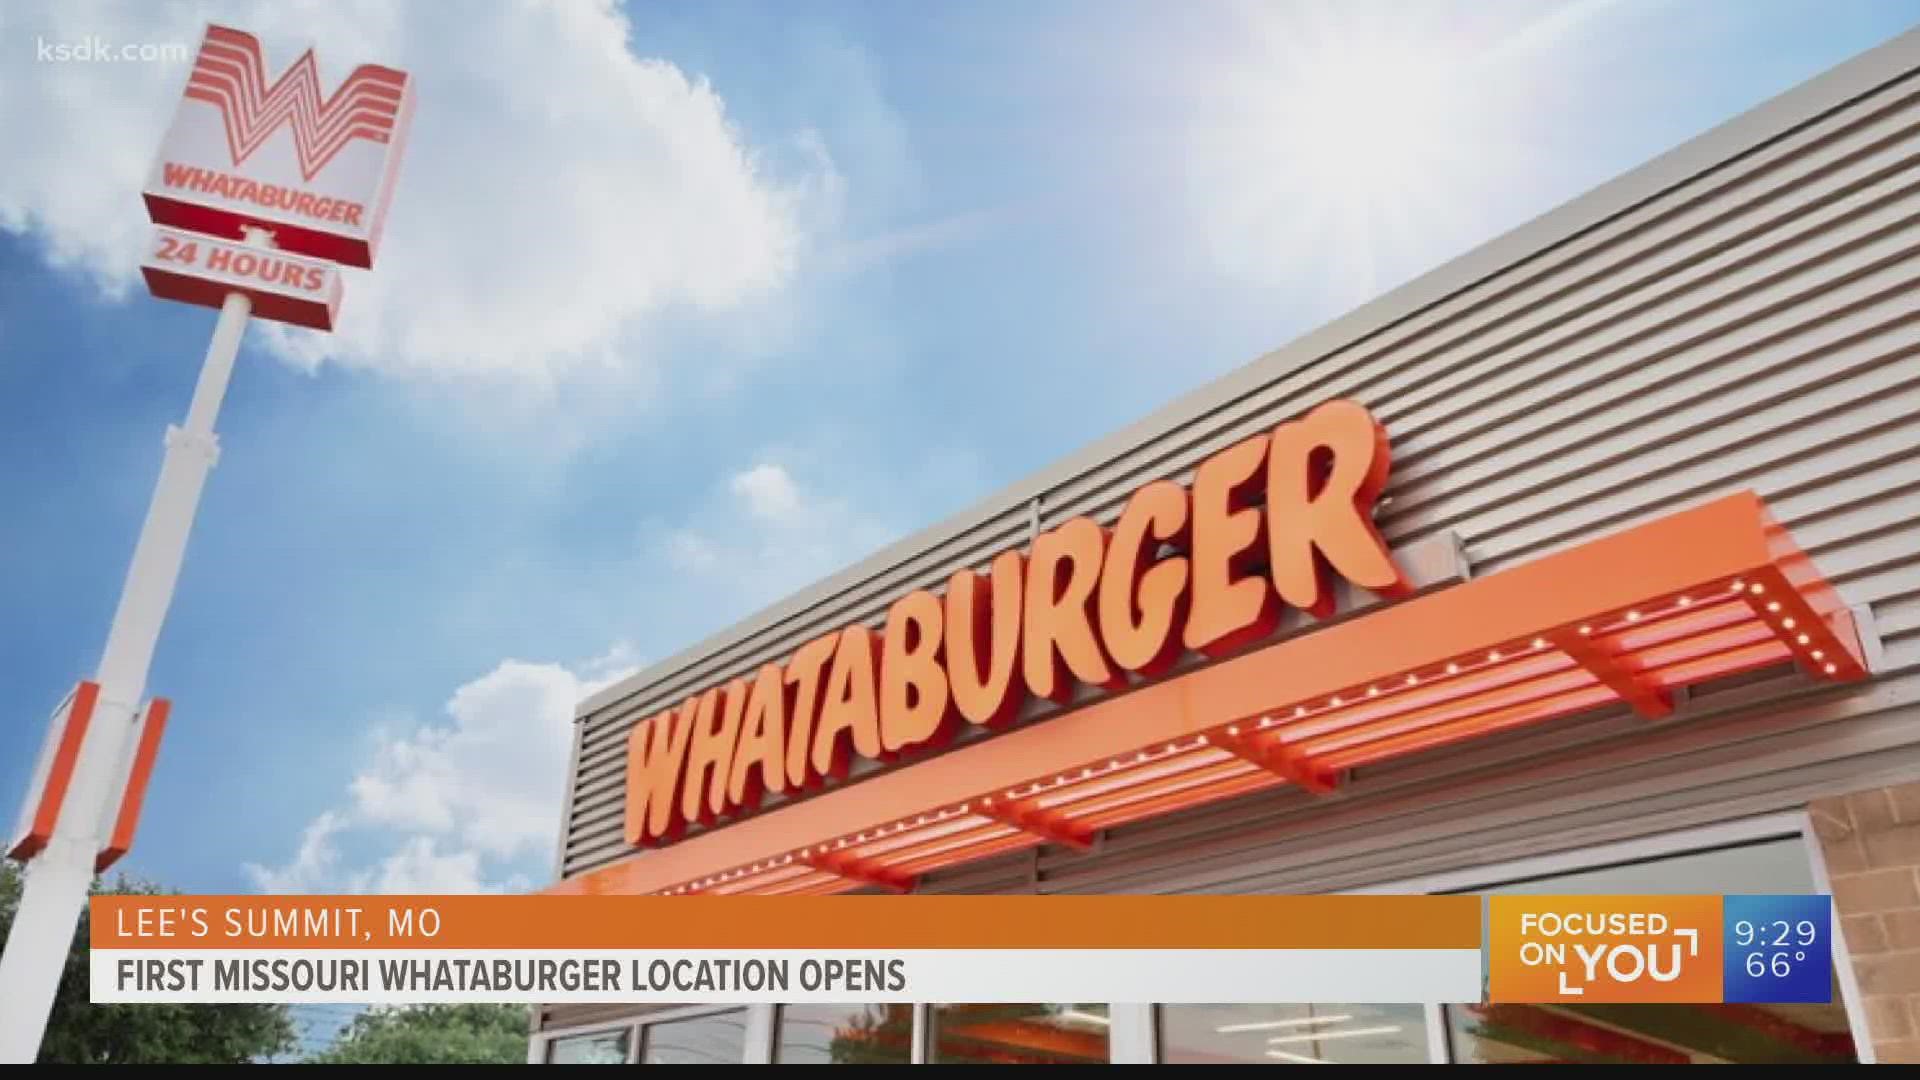 The first of what is planned to be several Kansas City-area Whataburger locations opened Monday in Lee's Summit, Missouri. Which burger joint do you want in STL?